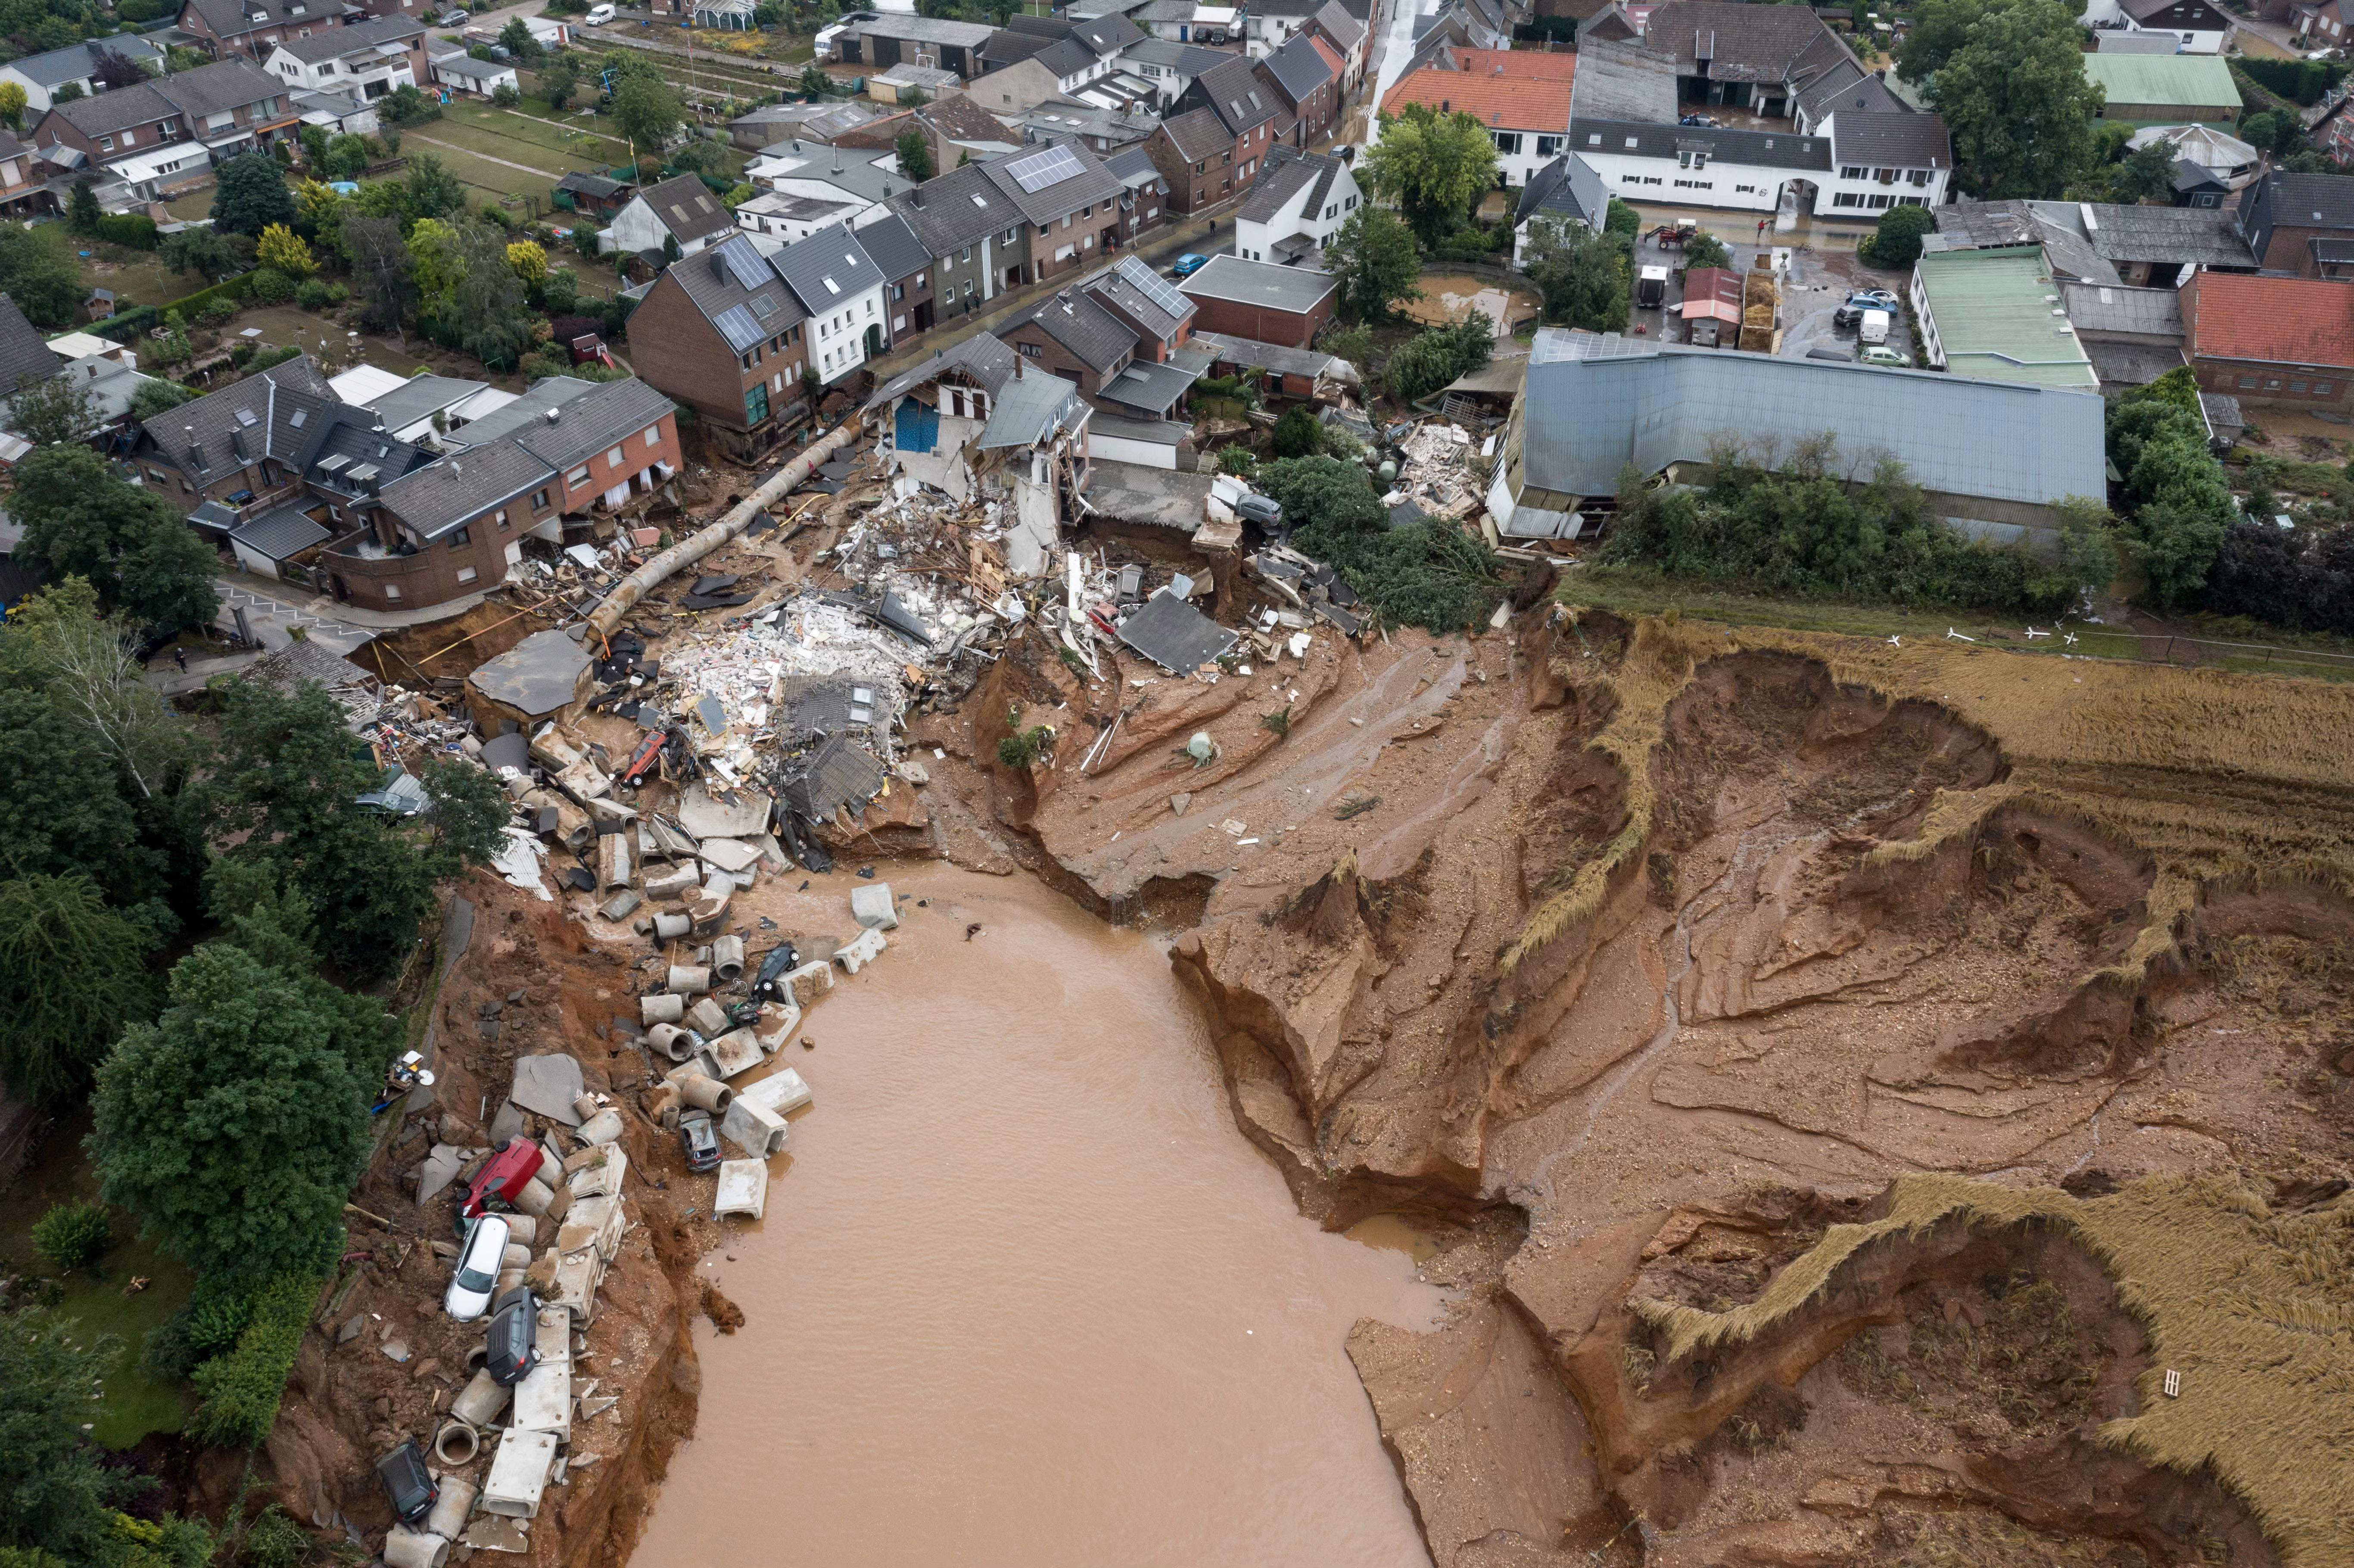 Photos show disastrous flooding in western Europe